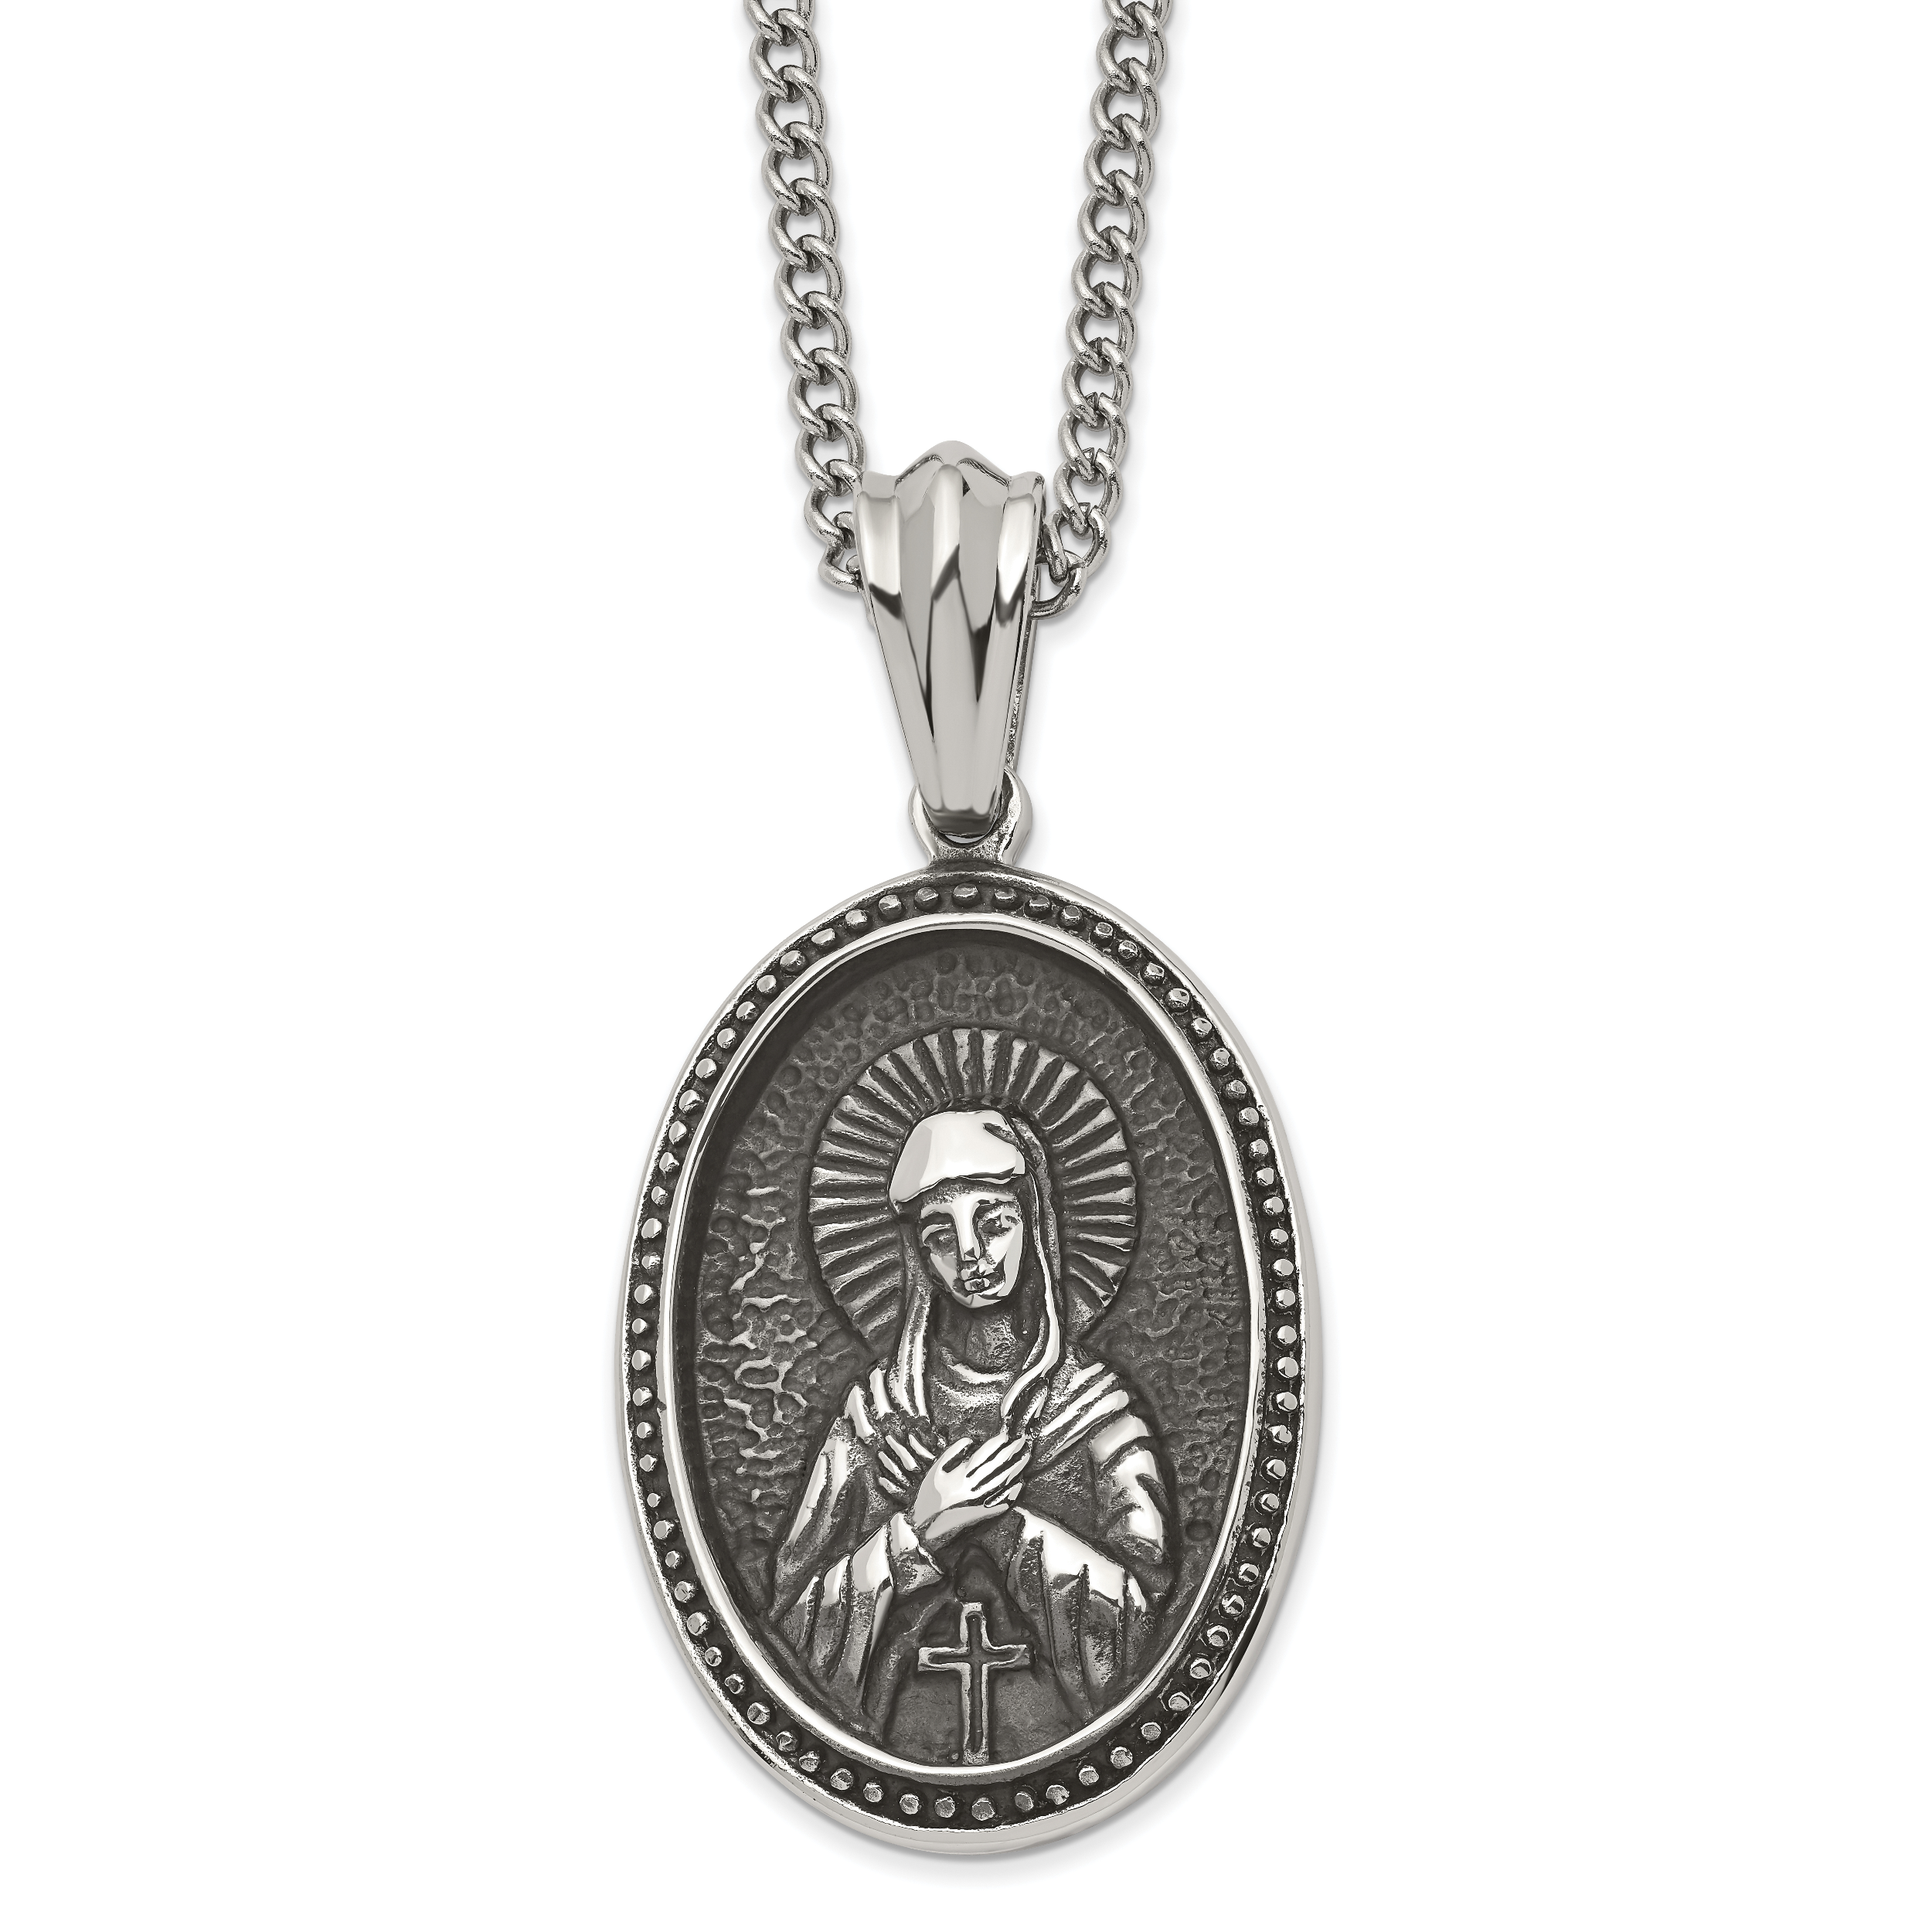 Our Lady of Guadalupe Gold plated Silver and Porcelain oval Pendant mm  19x24 (0,75x0,95 inch) Unisex Woman Man | Vaticanum.com